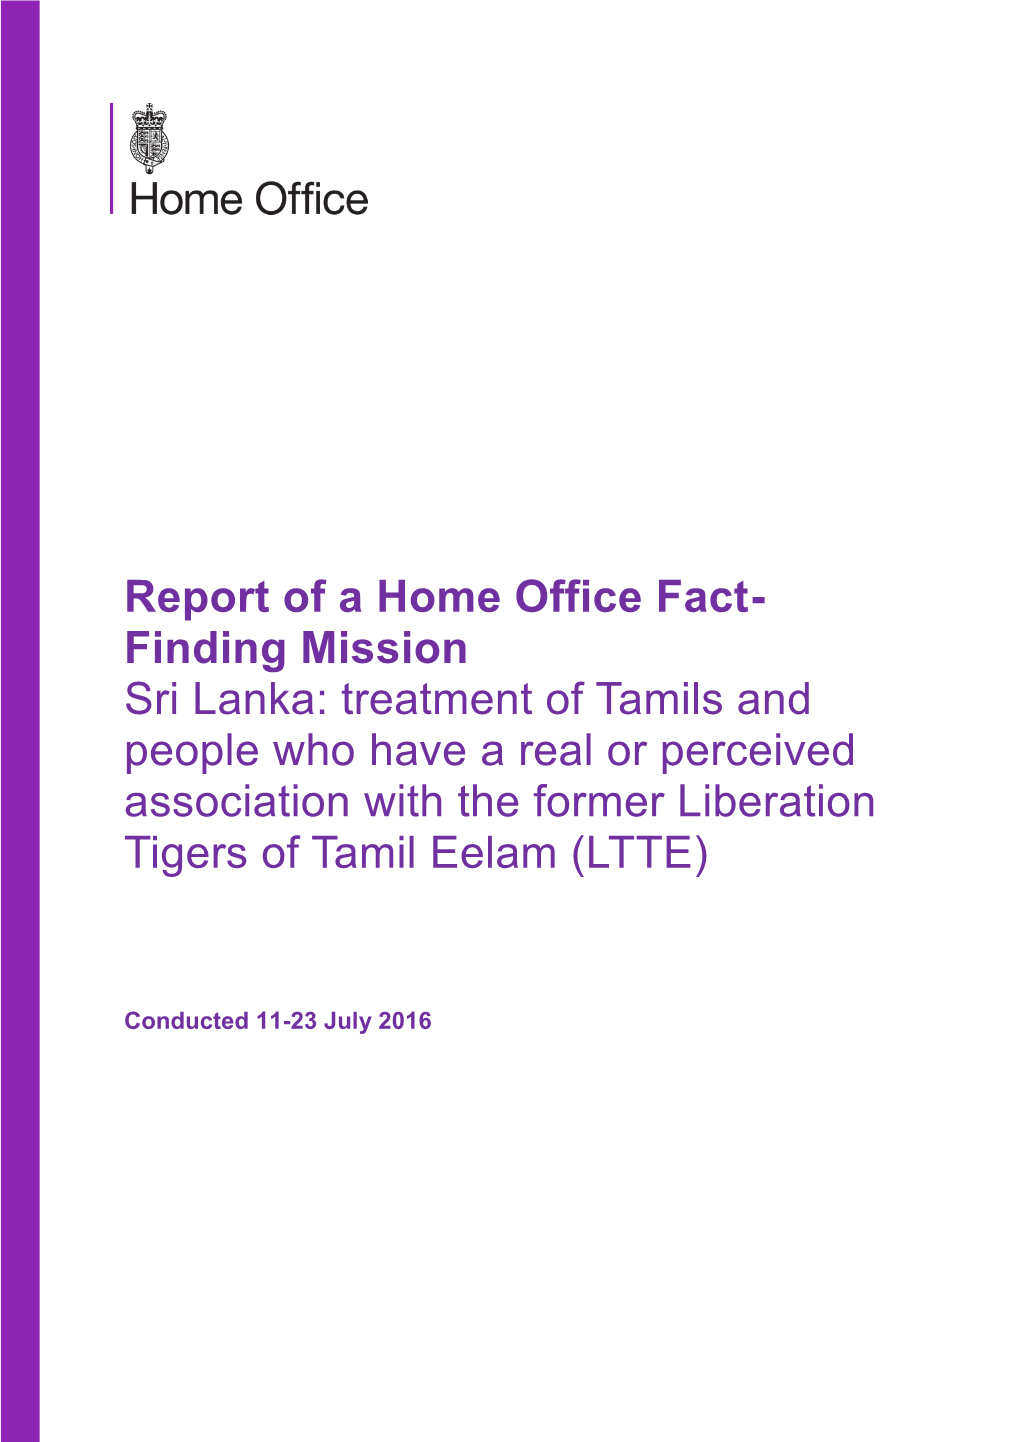 Sri Lanka: Treatment of Tamils and People Who Have a Real Or Perceived Association with the Former Liberation Tigers of Tamil Eelam (LTTE)